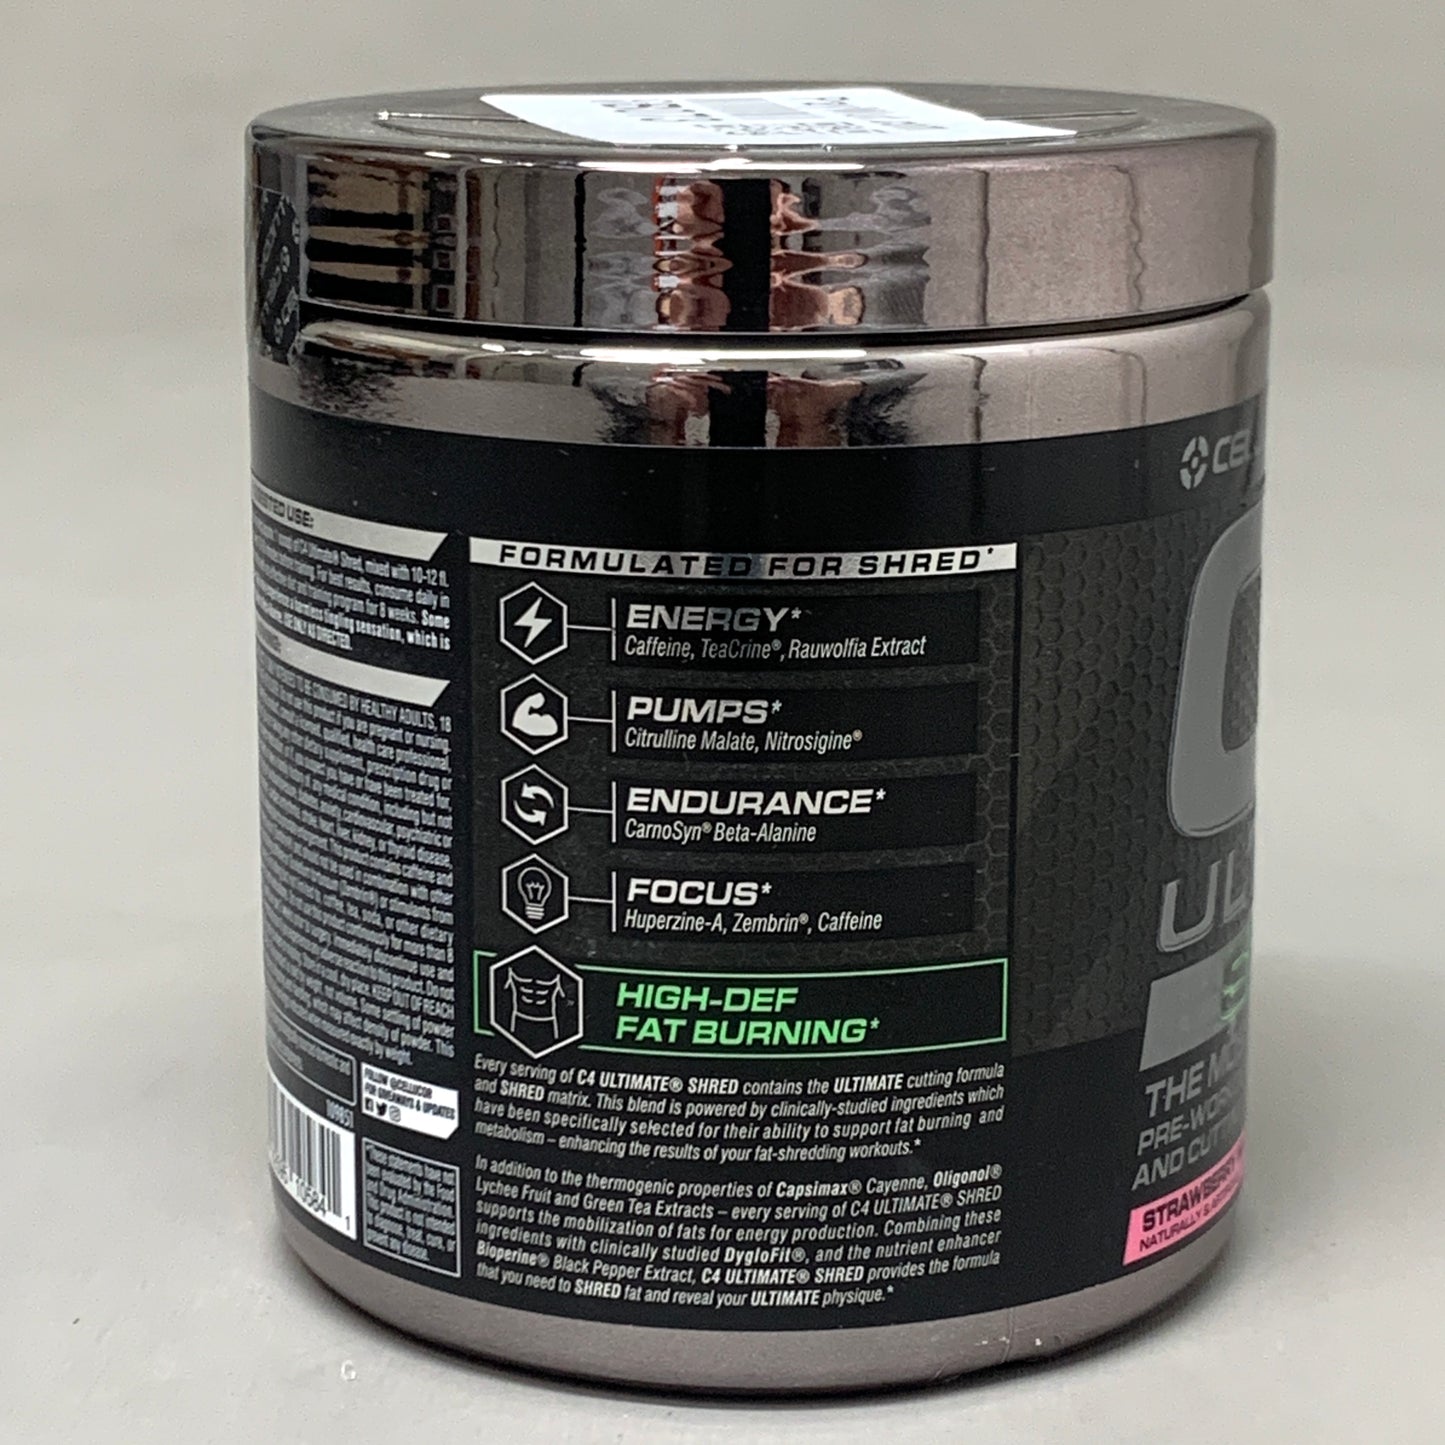 CELLUCOR C4 Ultimate Shred Strawberry Watermelon Dietary Supplement 12.3 oz. 350g (New)